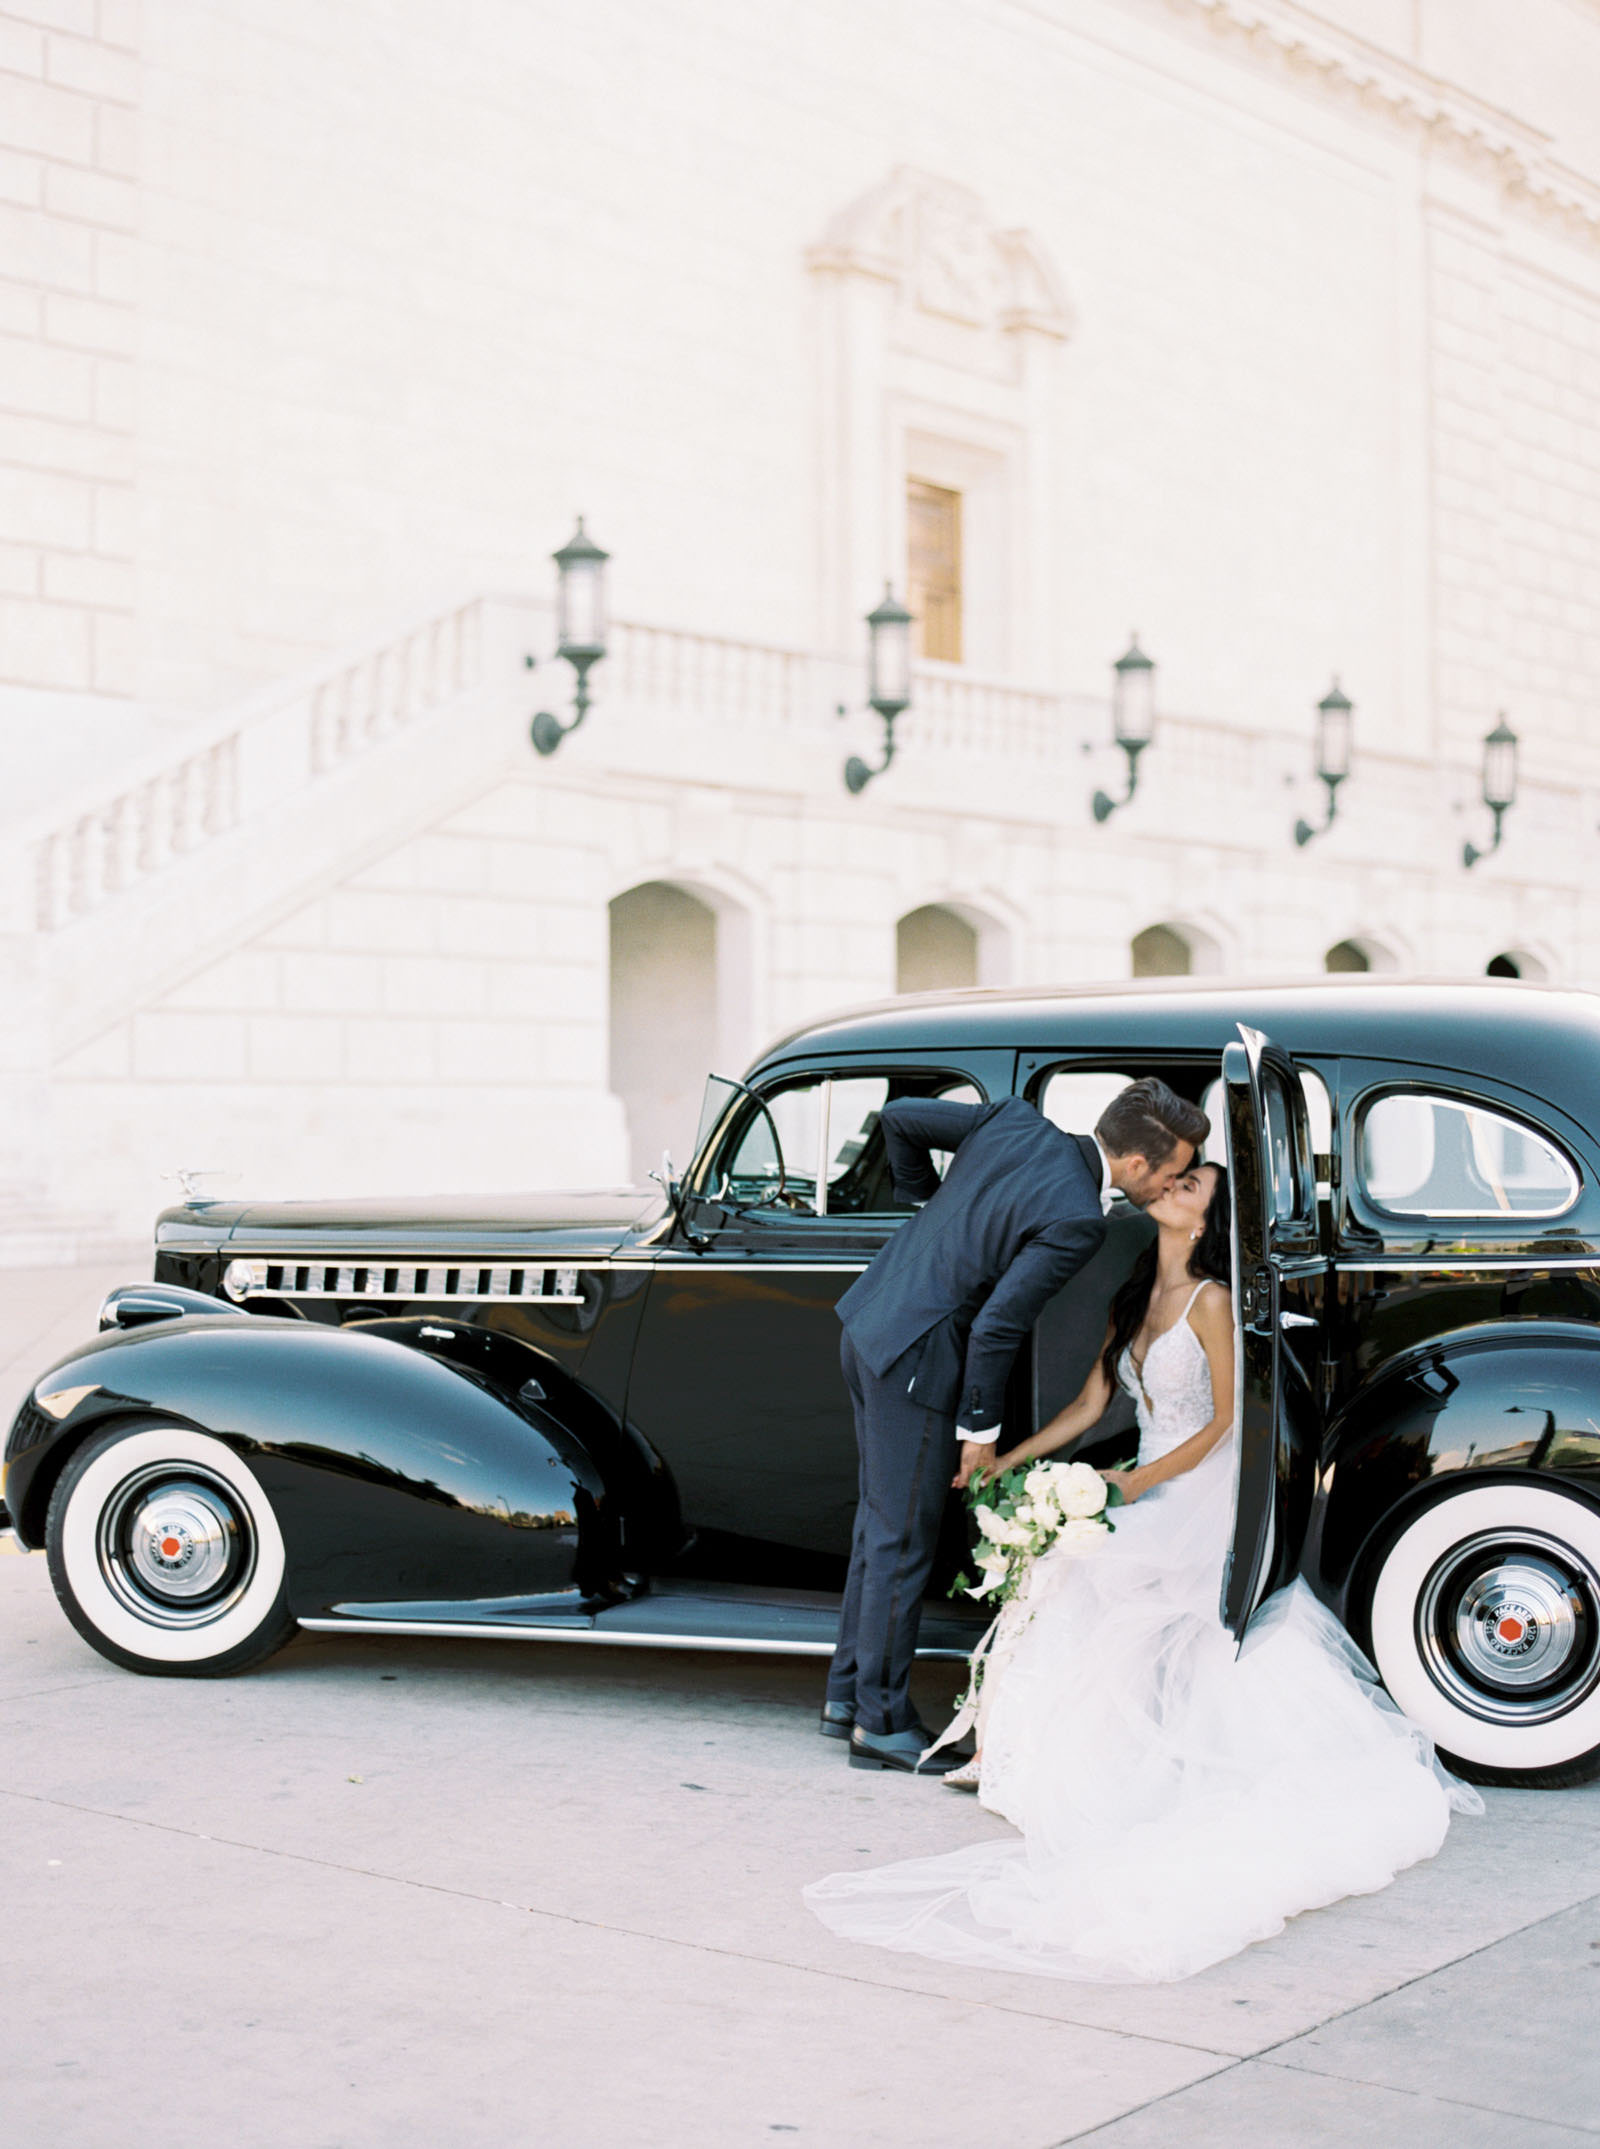 Wedding photos at the Detroit institute of arts with classic car